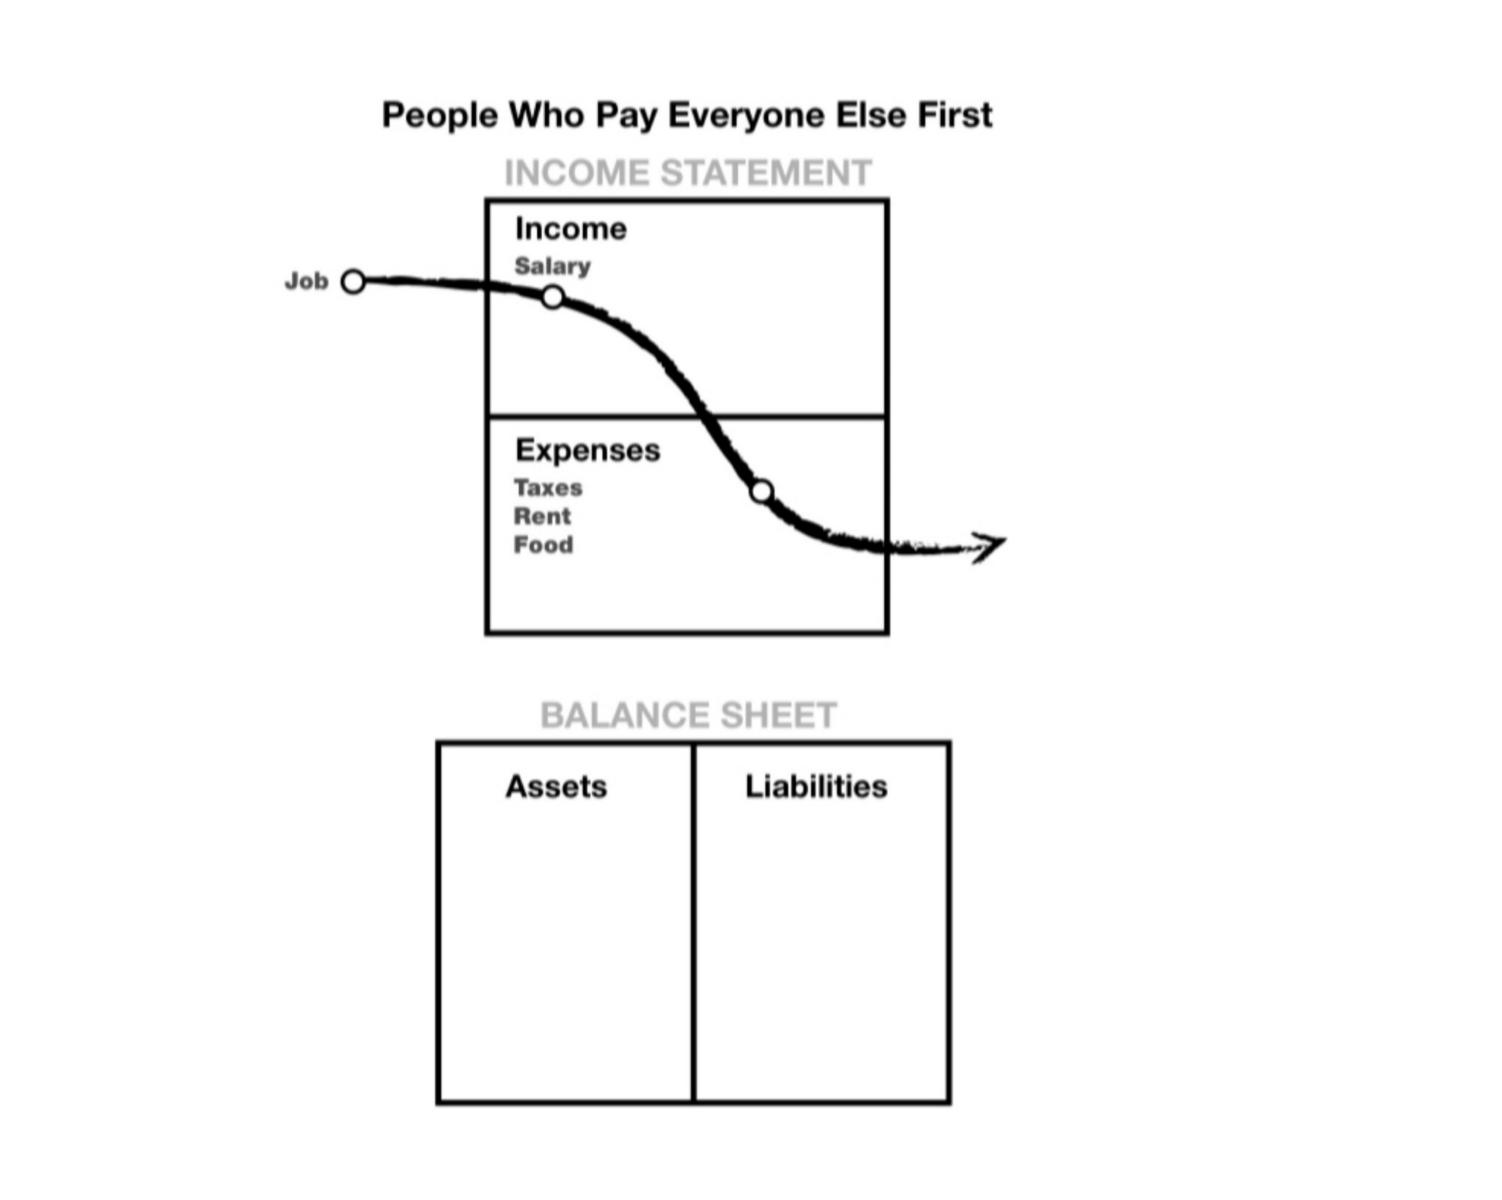 A person who pays everyone first: